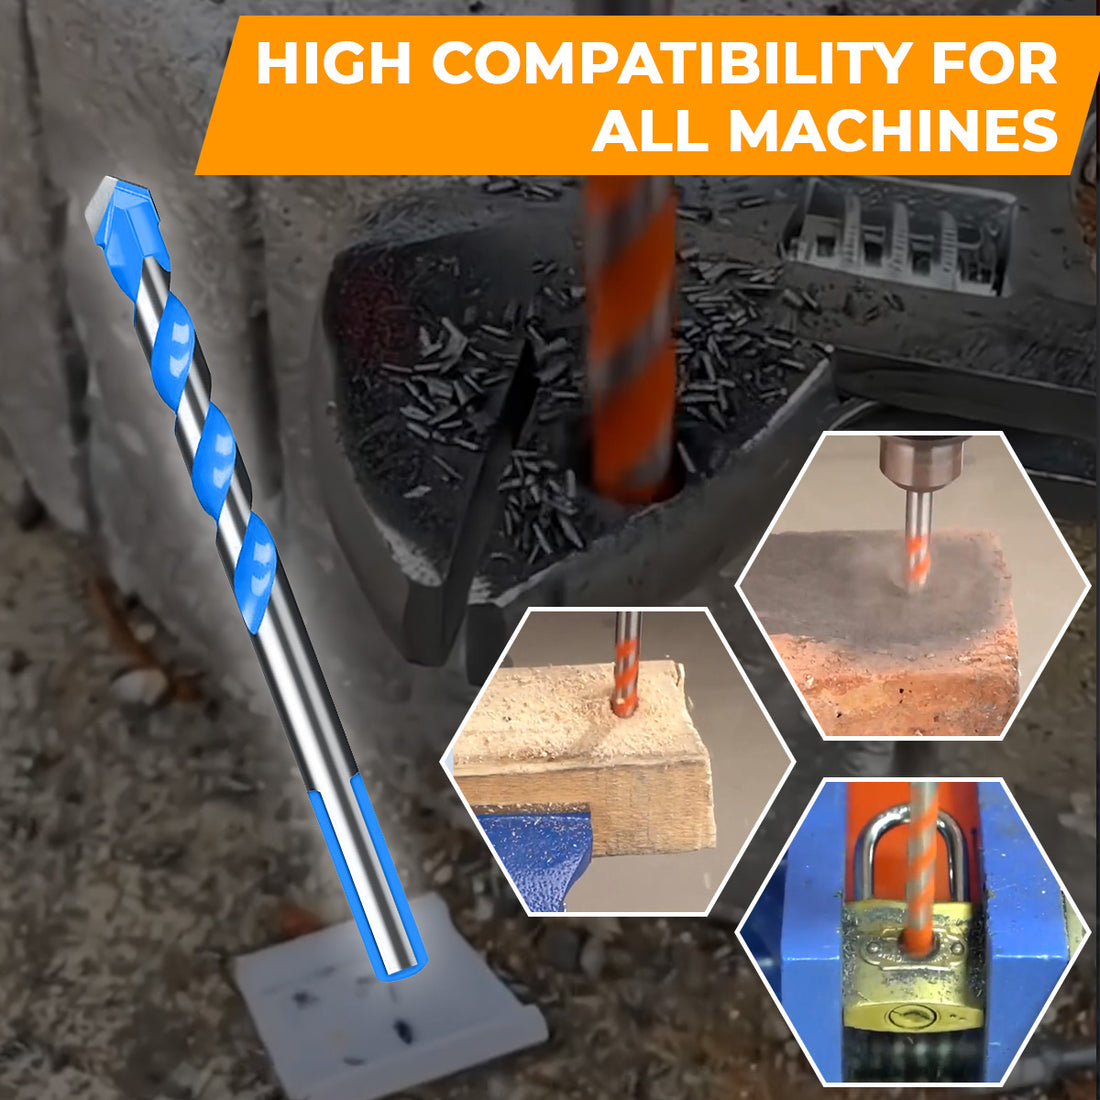 INDESTRUCTIBLE DRILLBITS™ 2.0 - Drill any material in seconds